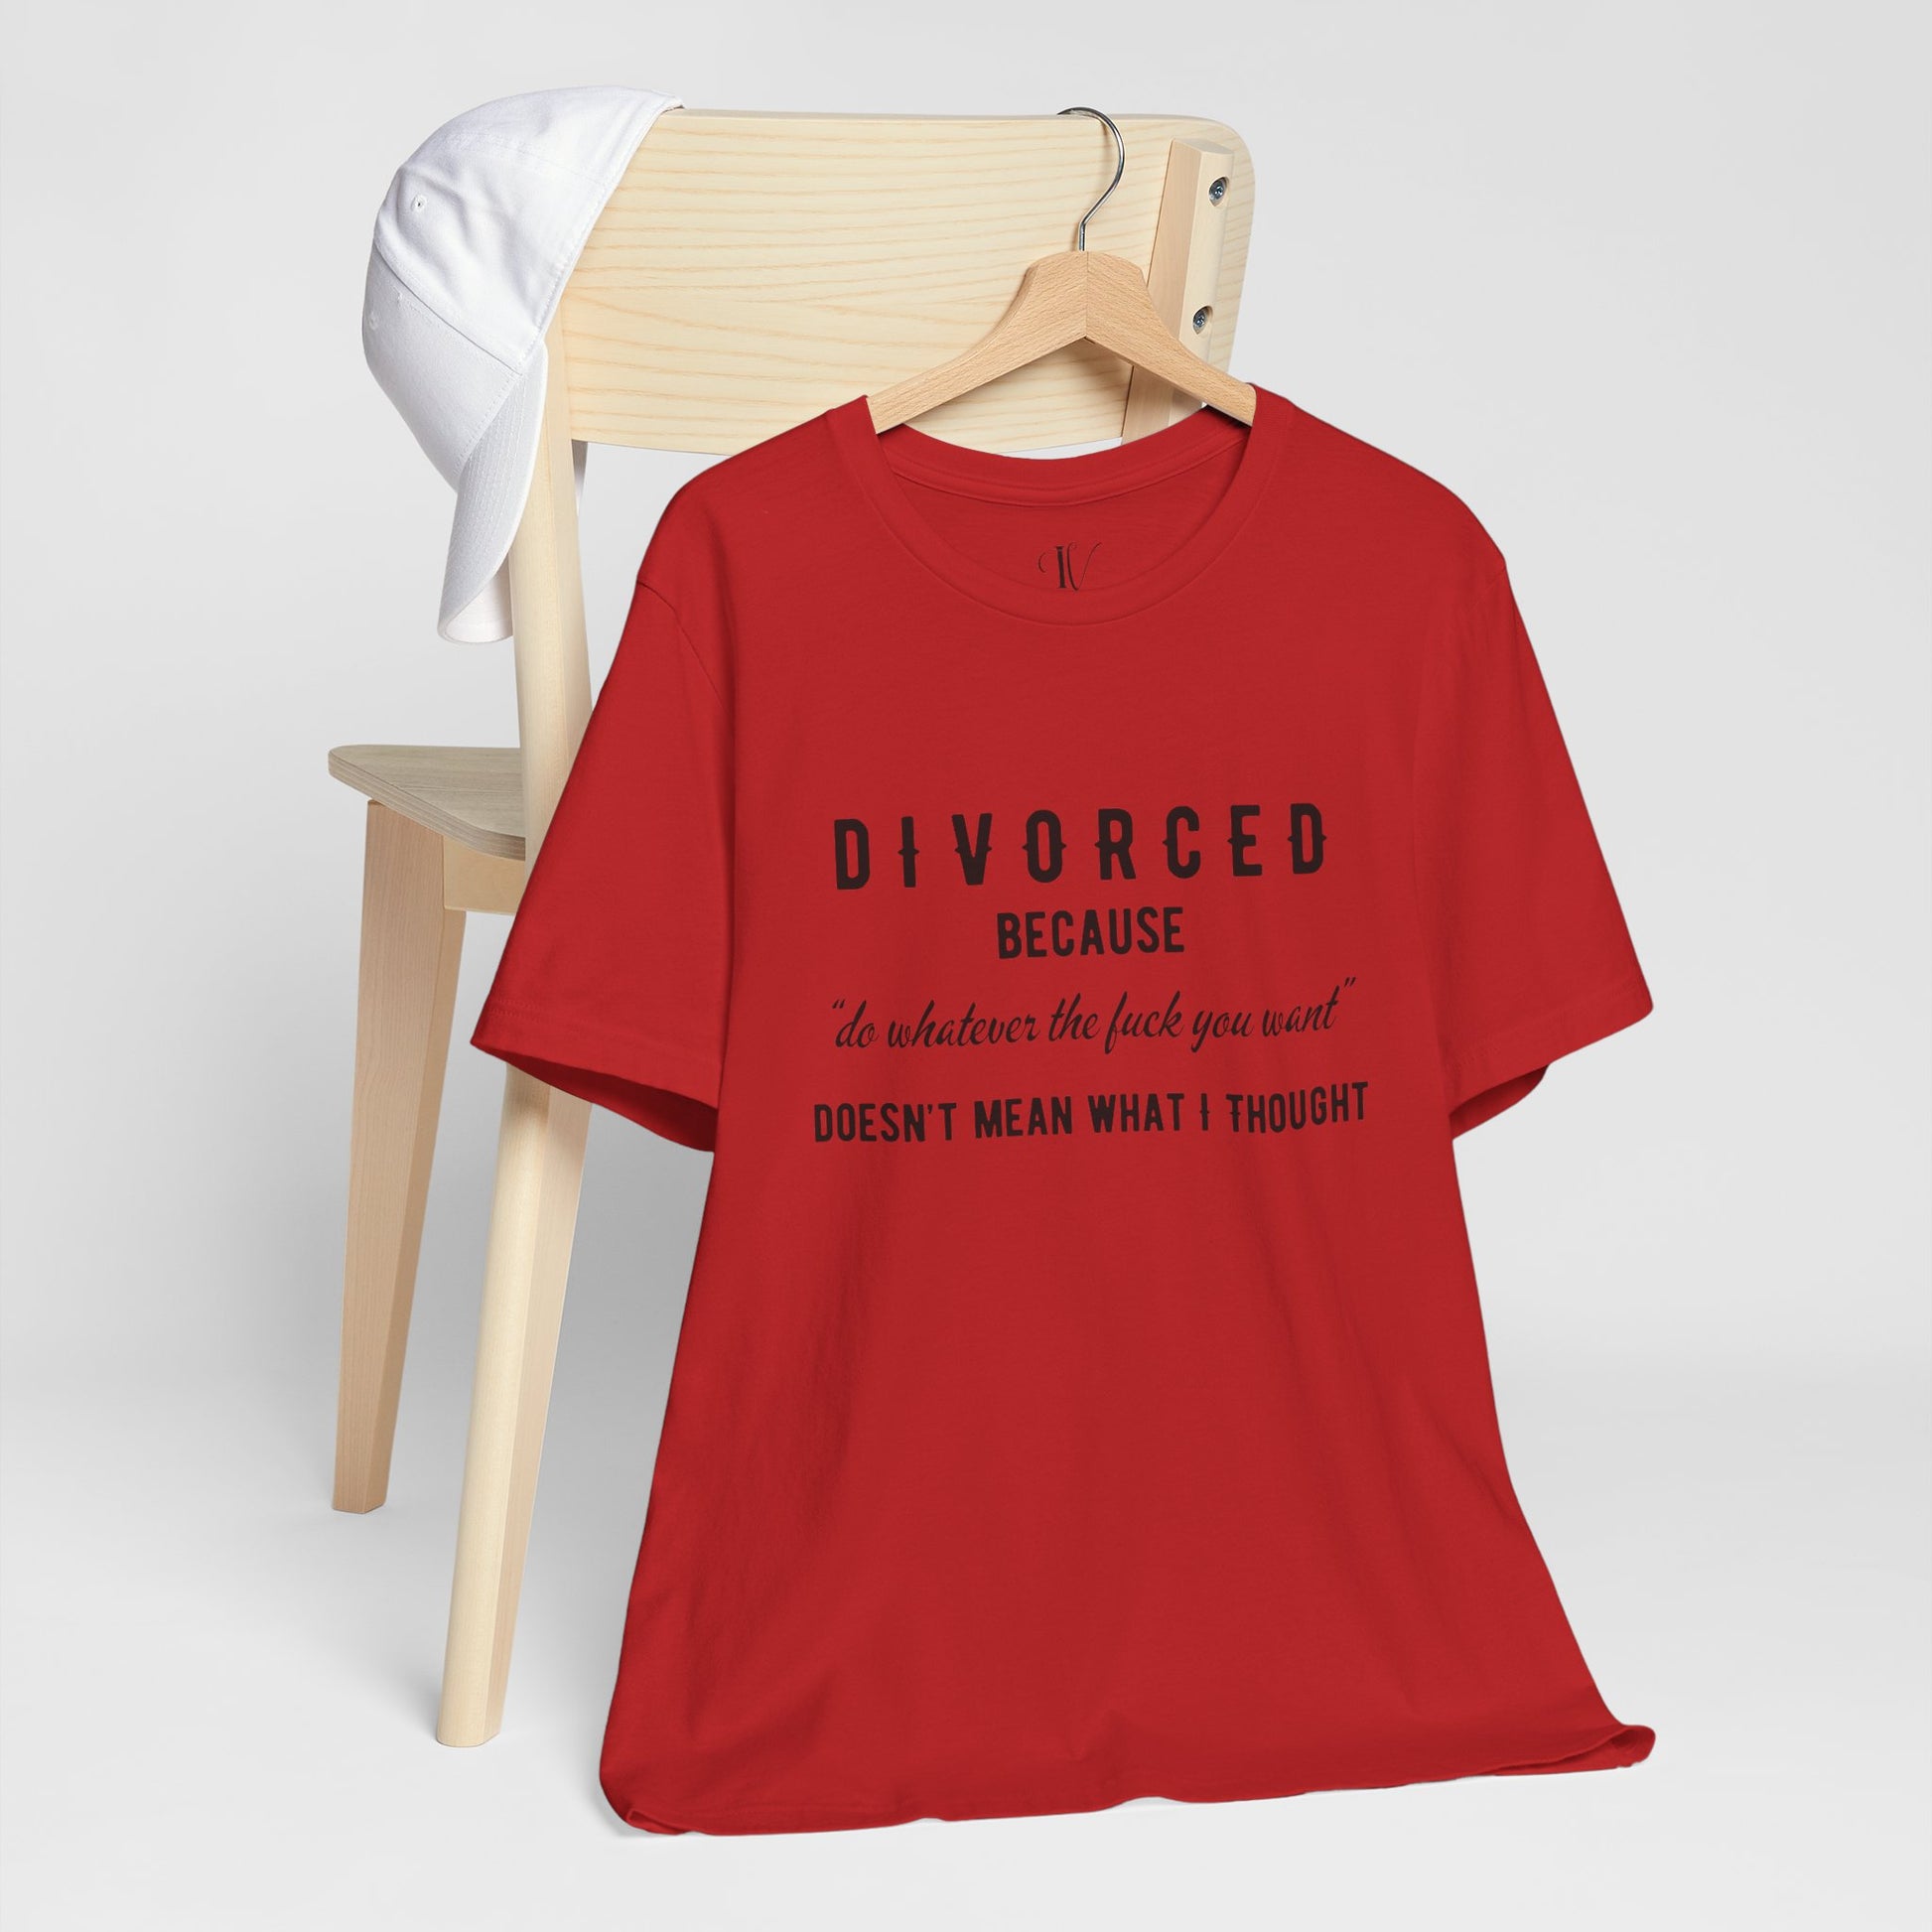 Divorced Shirt - Funny Divorce Party Gift for Ex-Husband or Ex-Wife T-Shirt Red XS 